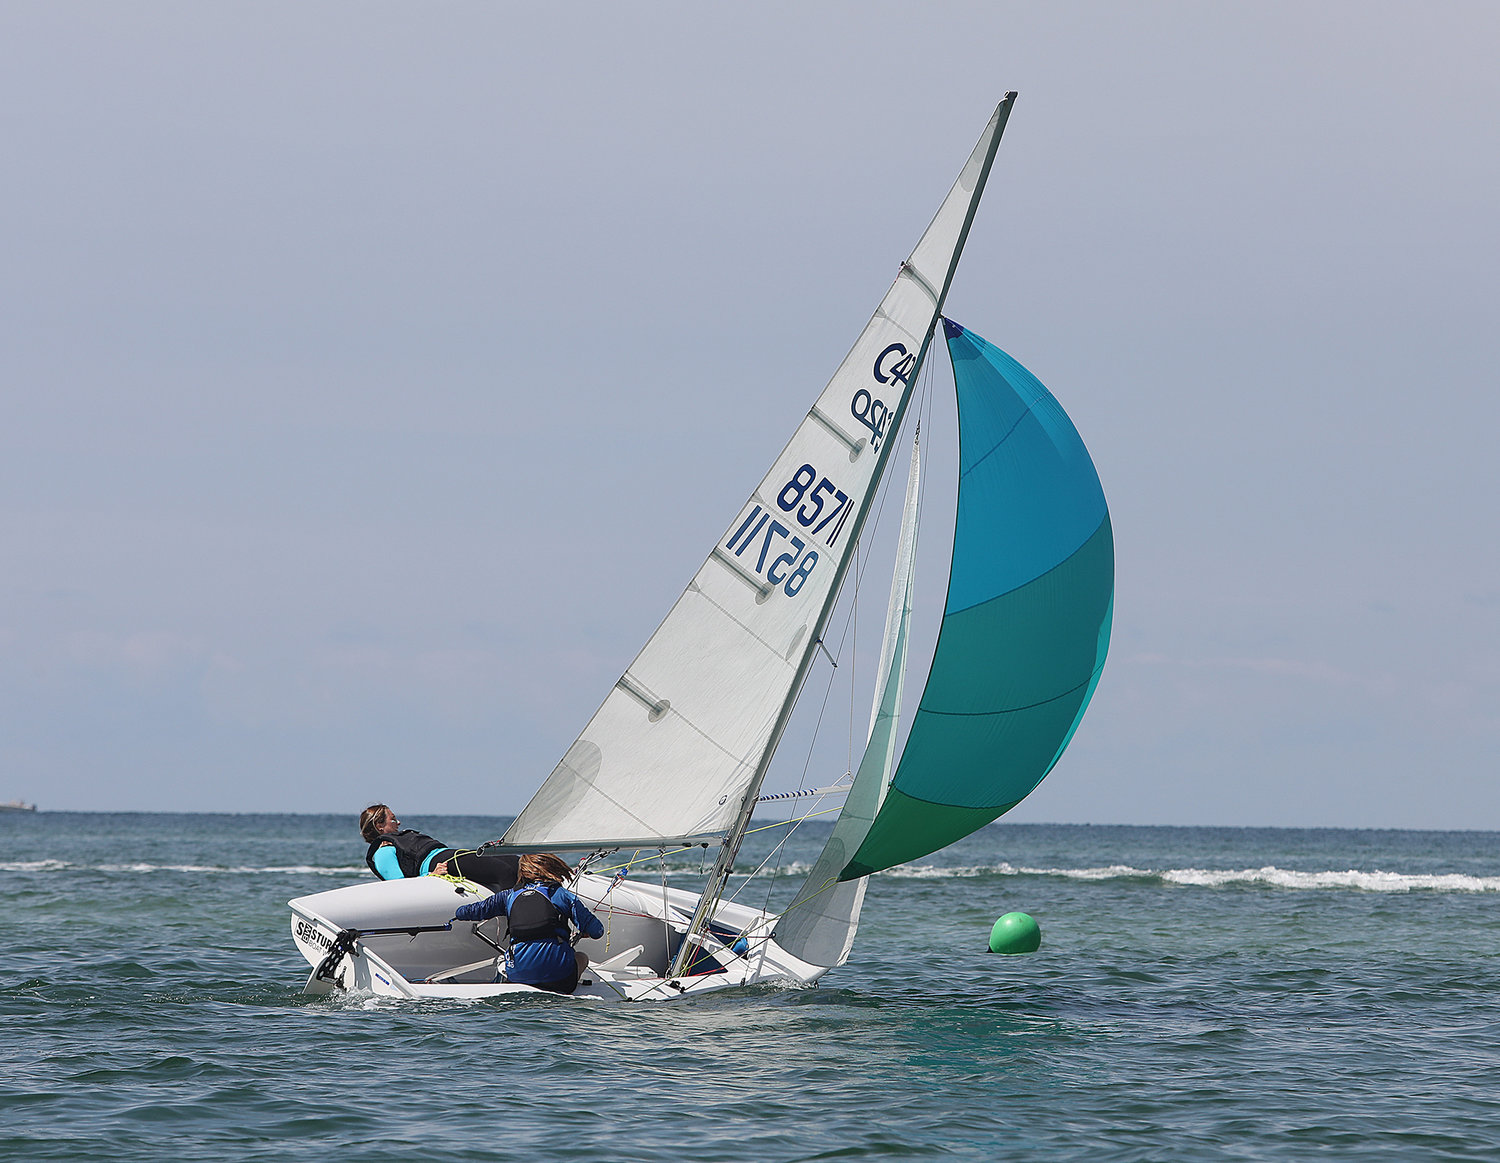 Heeling on a downwind leg during the first 420 race on Tuesday.